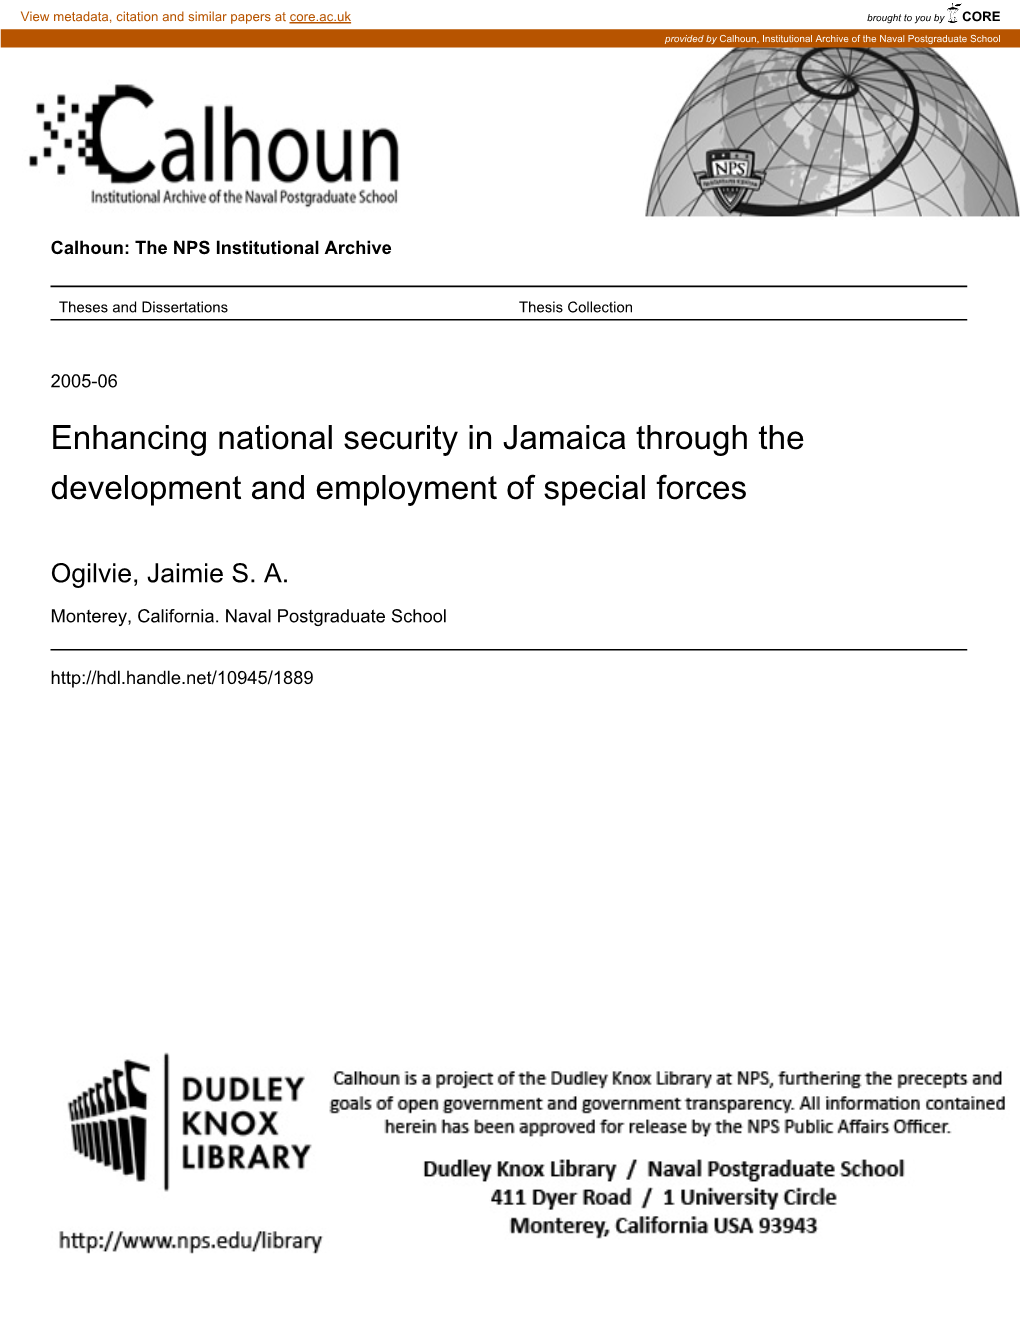 Enhancing National Security in Jamaica Through the Development and Employment of Special Forces